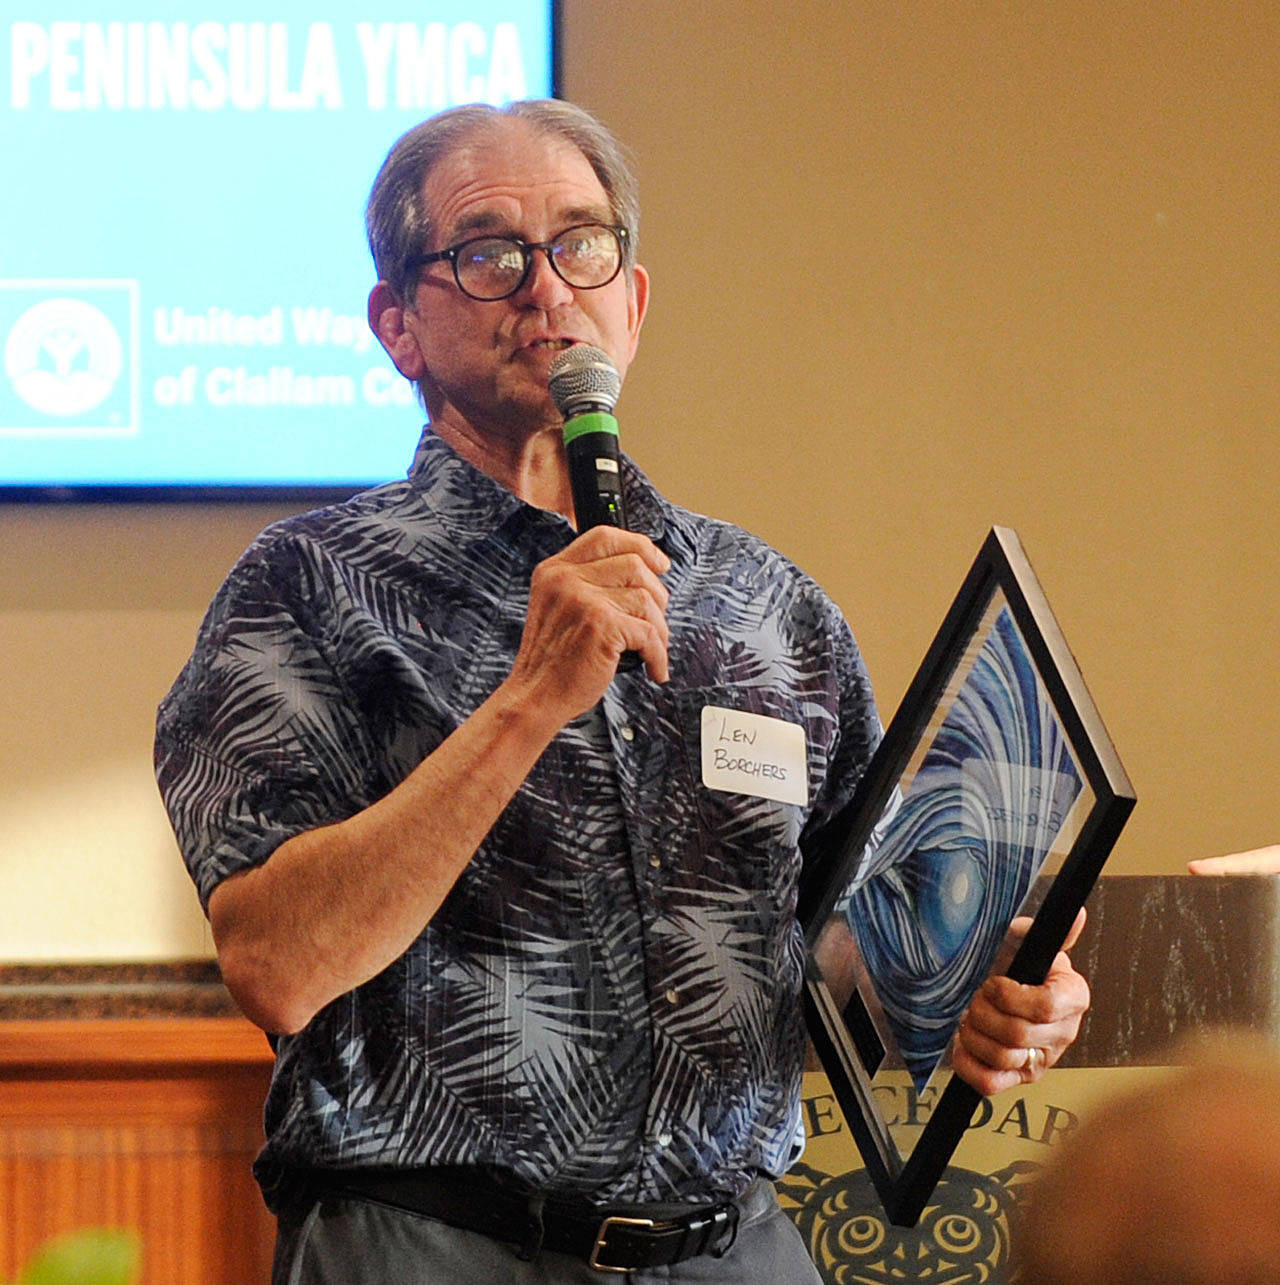 Len Borchers, chief executive officer of Olympic Peninsula YMCA, speaks at the United Way of Clallam County Campaign Celebration at The Cedars at Dungeness in May 2019. Borchers has stepped down from the YMCA CEO position. (Michael Dashiell/Olympic Peninsula News Group)